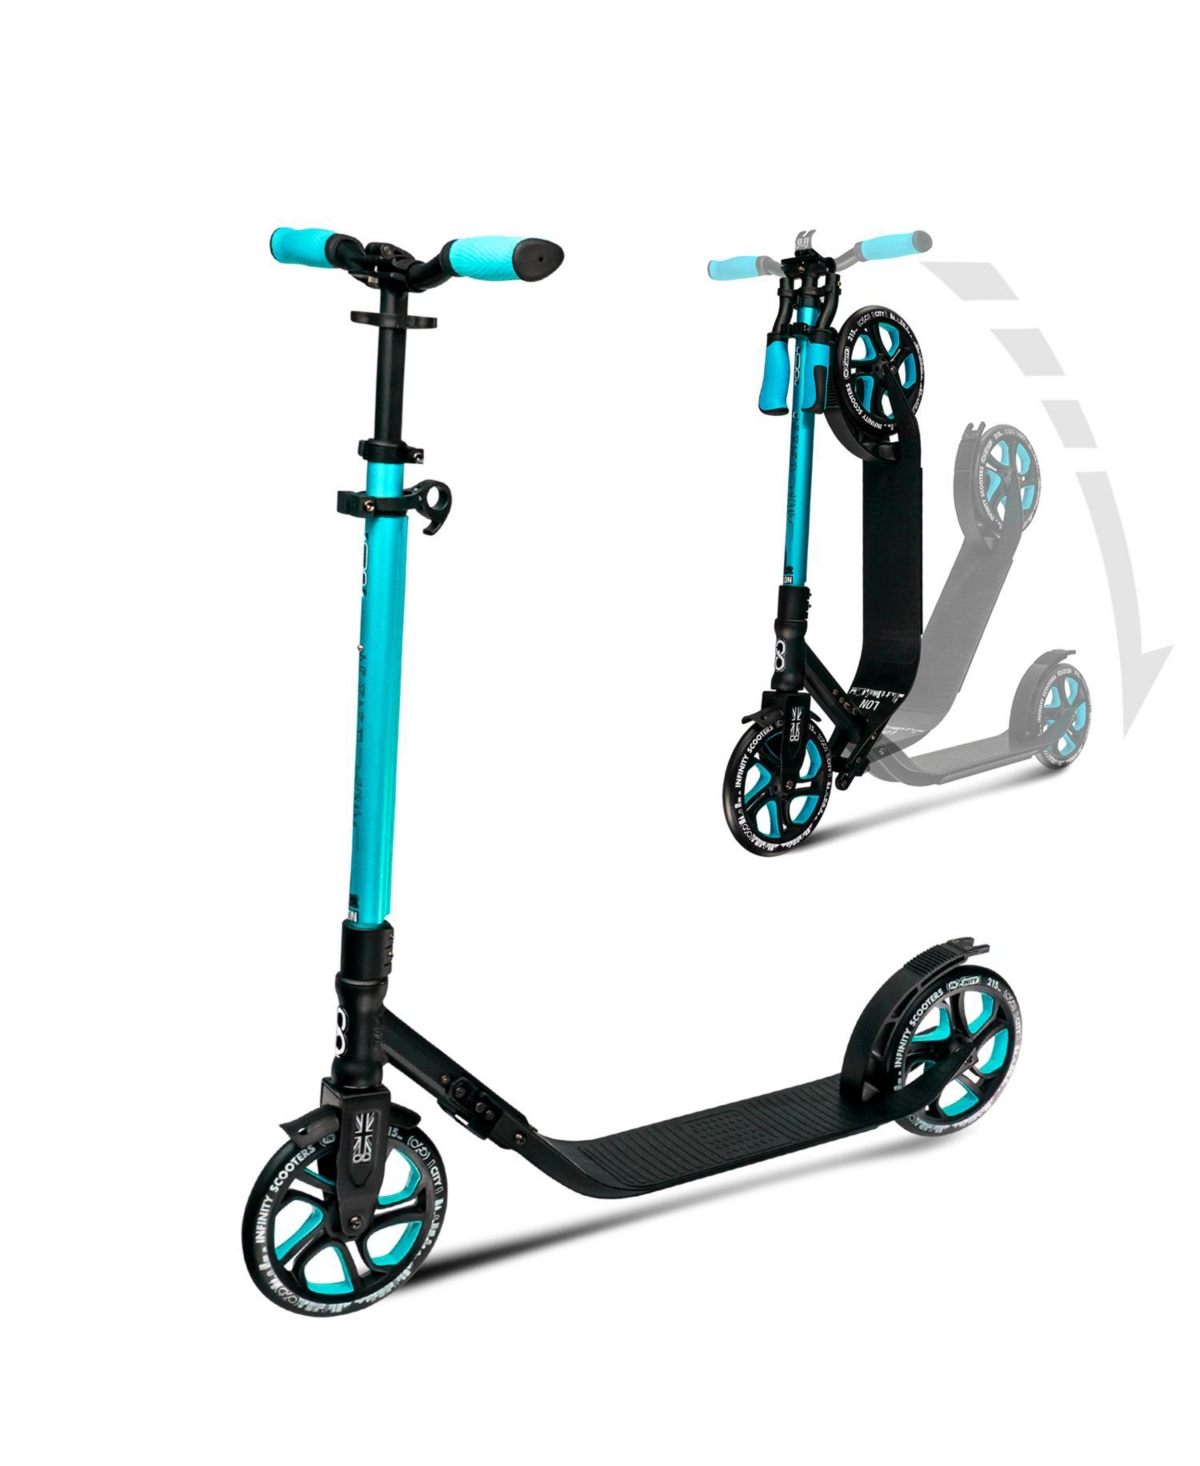 London Foldable Kick Scooter - Great Scooters For Teens And Adults - Gold